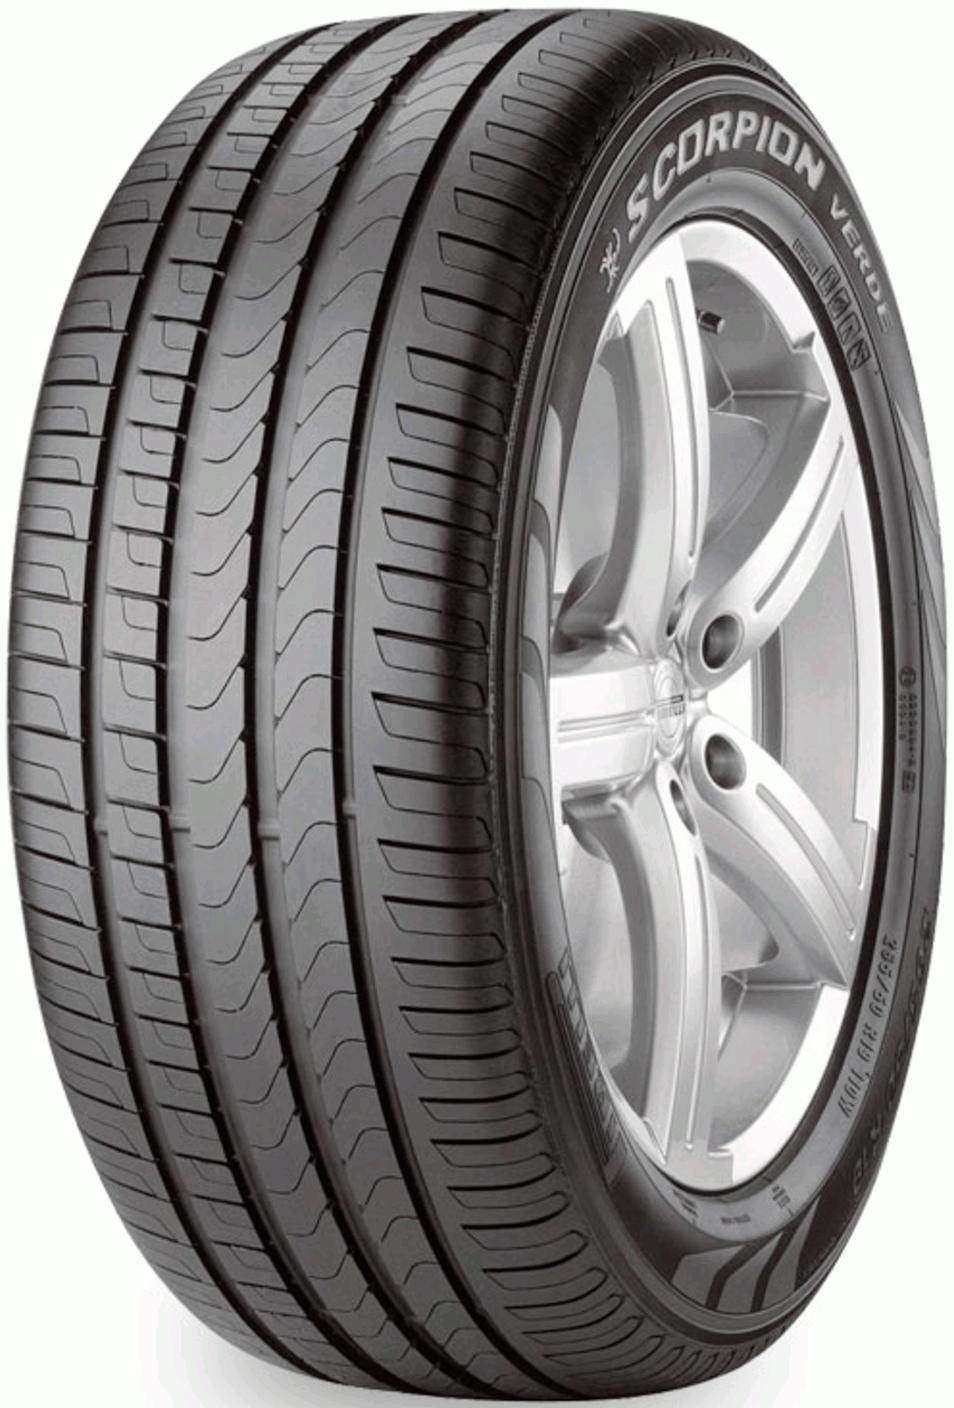 Pirelli Scorpion Tests and - Tire Reviews Verde